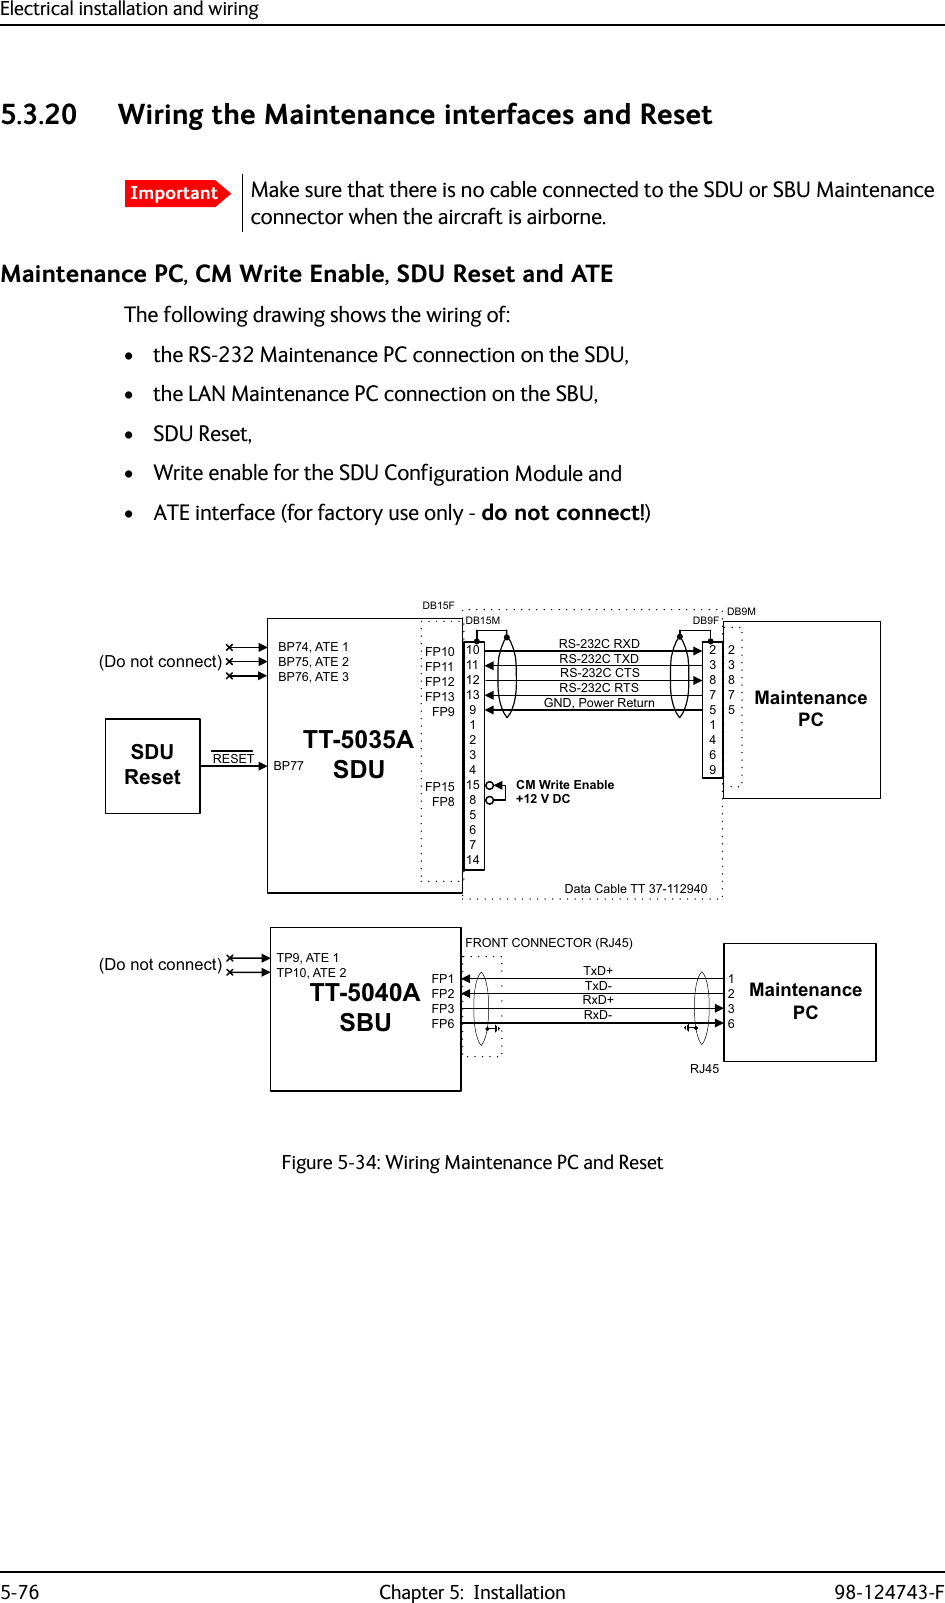 Electrical installation and wiring5-76 Chapter 5:  Installation 98-124743-F5.3.20 Wiring the Maintenance interfaces and ResetMaintenance PC, CM Write Enable, SDU Reset and ATE The following drawing shows the wiring of:• the RS-232 Maintenance PC connection on the SDU,• the LAN Maintenance PC connection on the SBU,•SDU Reset,• Write enable for the SDU Configuration Module and• ATE interface (for factory use only - do not connect!)ImportantMake sure that there is no cable connected to the SDU or SBU Maintenance connector when the aircraft is airborne.Figure 5-34: Wiring Maintenance PC and Reset77$6&apos;85(6(7 %3)3)3)3)3)3)3)3*1&apos;3RZHU5HWXUQ0DLQWHQDQFH3&amp;56&amp;57656&amp;5;&apos;56&amp;7;&apos;56&amp;&amp;76%3$7(%3$7(%3$7(&apos;RQRWFRQQHFW6&apos;85HVHW&apos;%)&apos;%0&apos;%)&amp;0:ULWH(QDEOH&apos;DWD&amp;DEOH779&apos;&amp;&apos;%077$6%873$7(73$7( )3)3)3)30DLQWHQDQFH3&amp;)5217&amp;211(&amp;7255-5[&apos;5[&apos;7[&apos;7[&apos;5-&apos;RQRWFRQQHFW